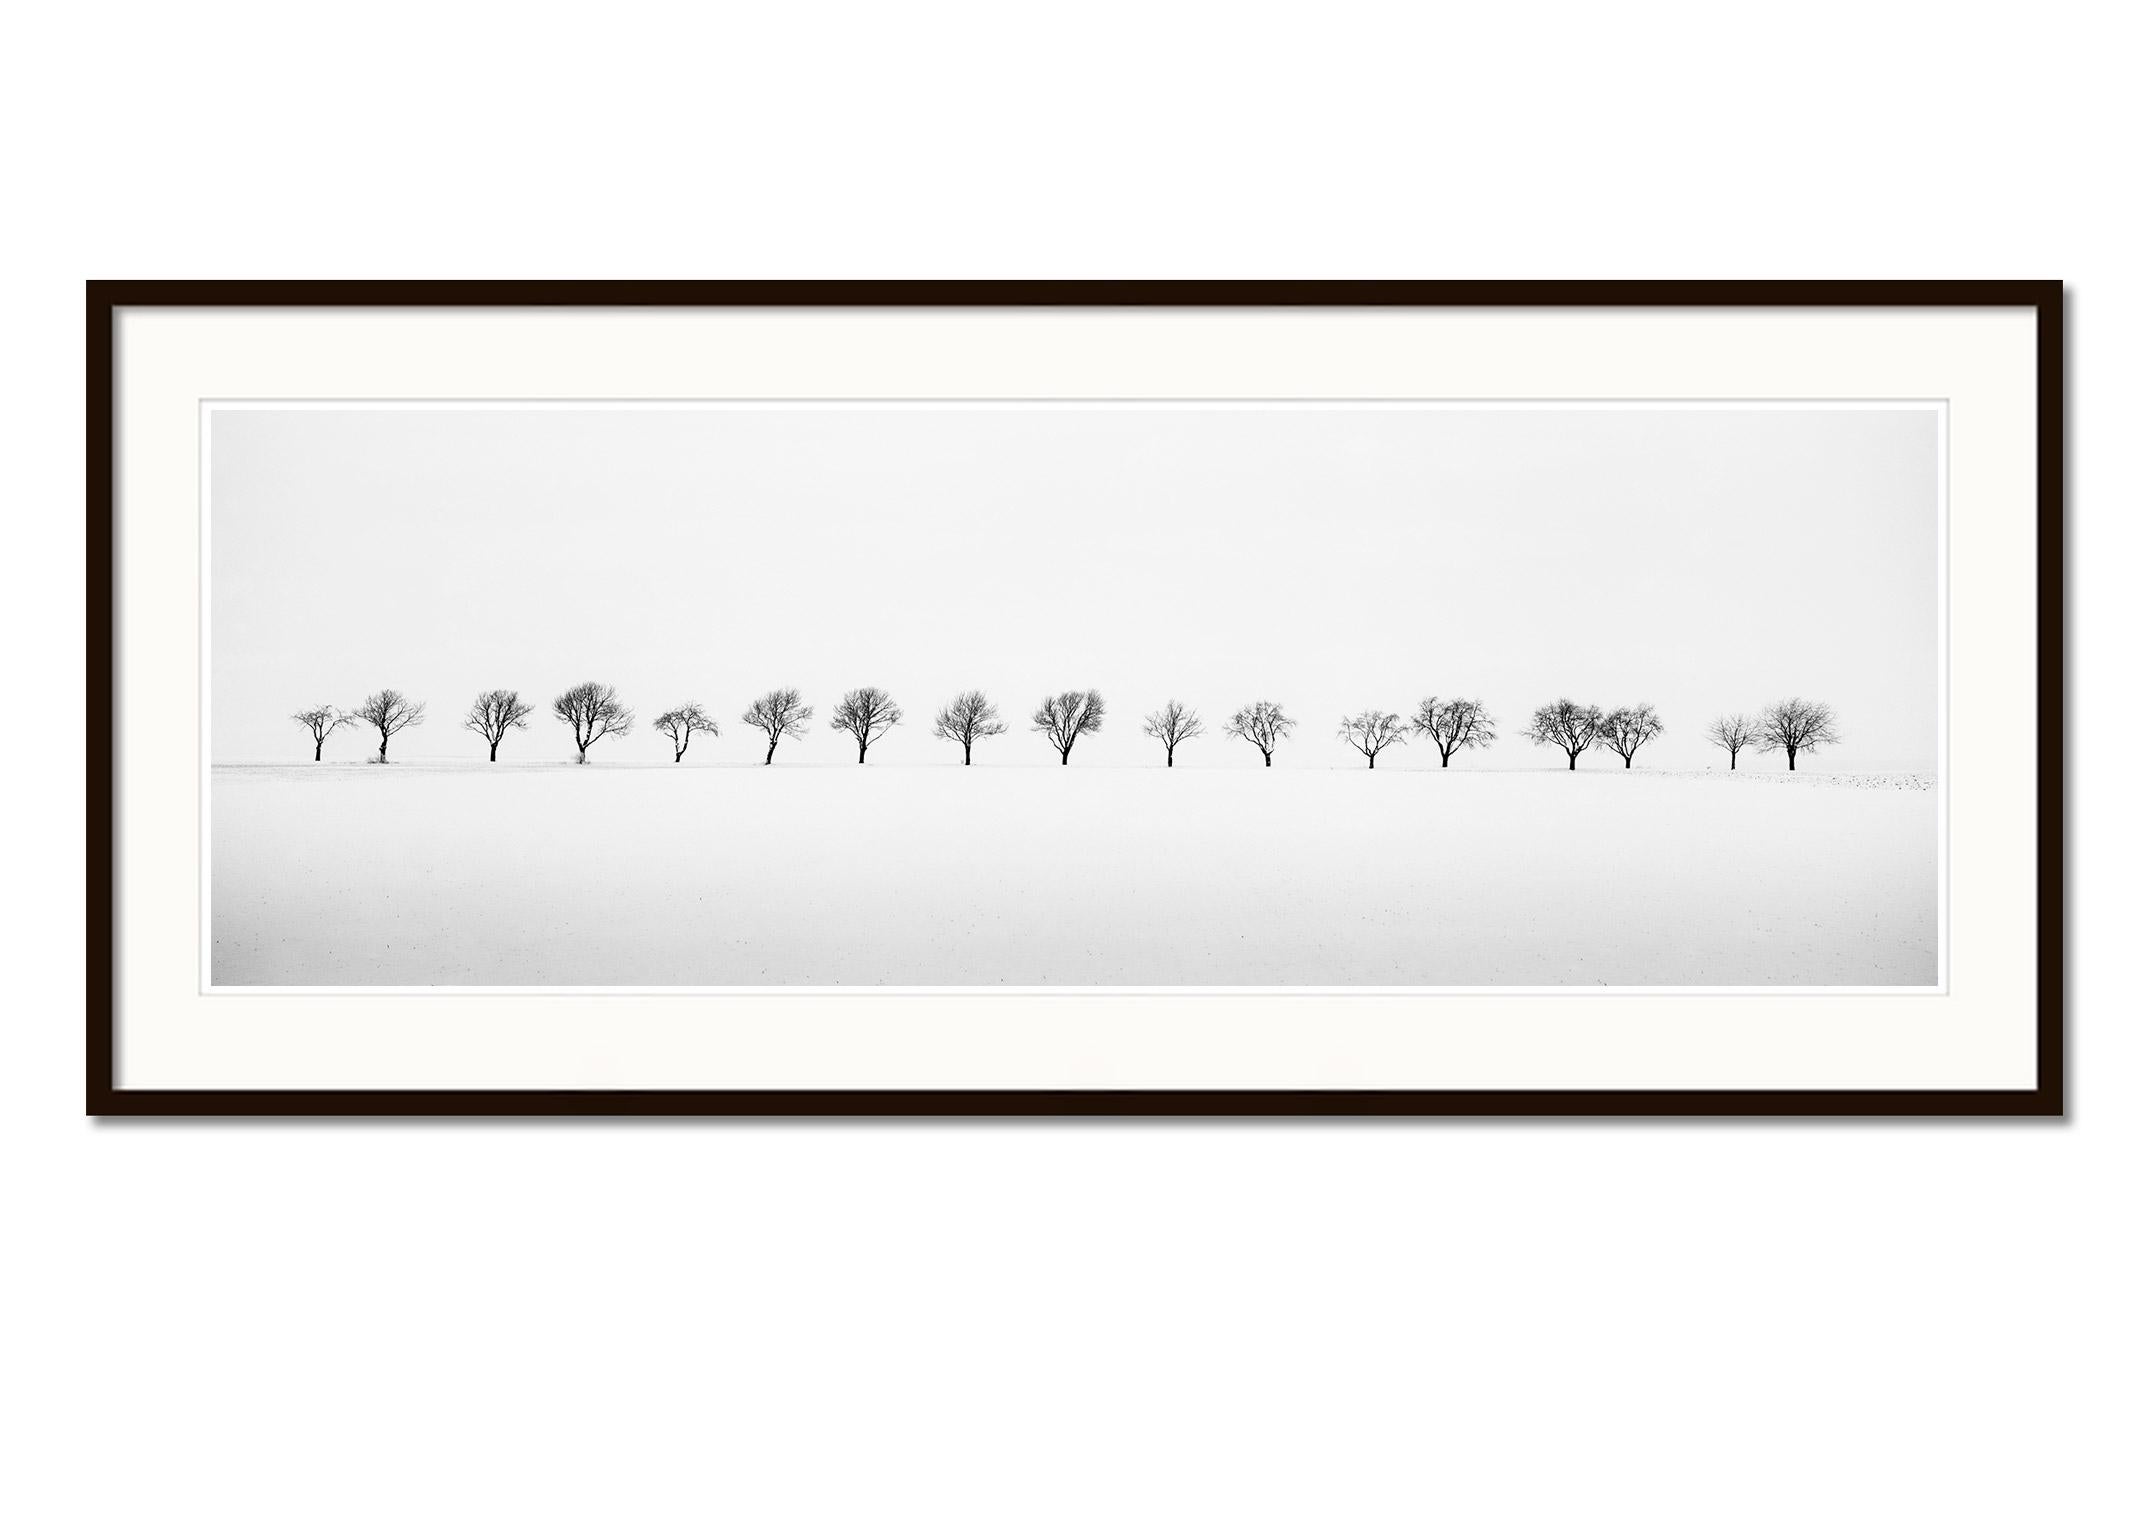 Cherry Trees in Snow Field, minimalist black and white photography, landscape - Contemporary Photograph by Gerald Berghammer